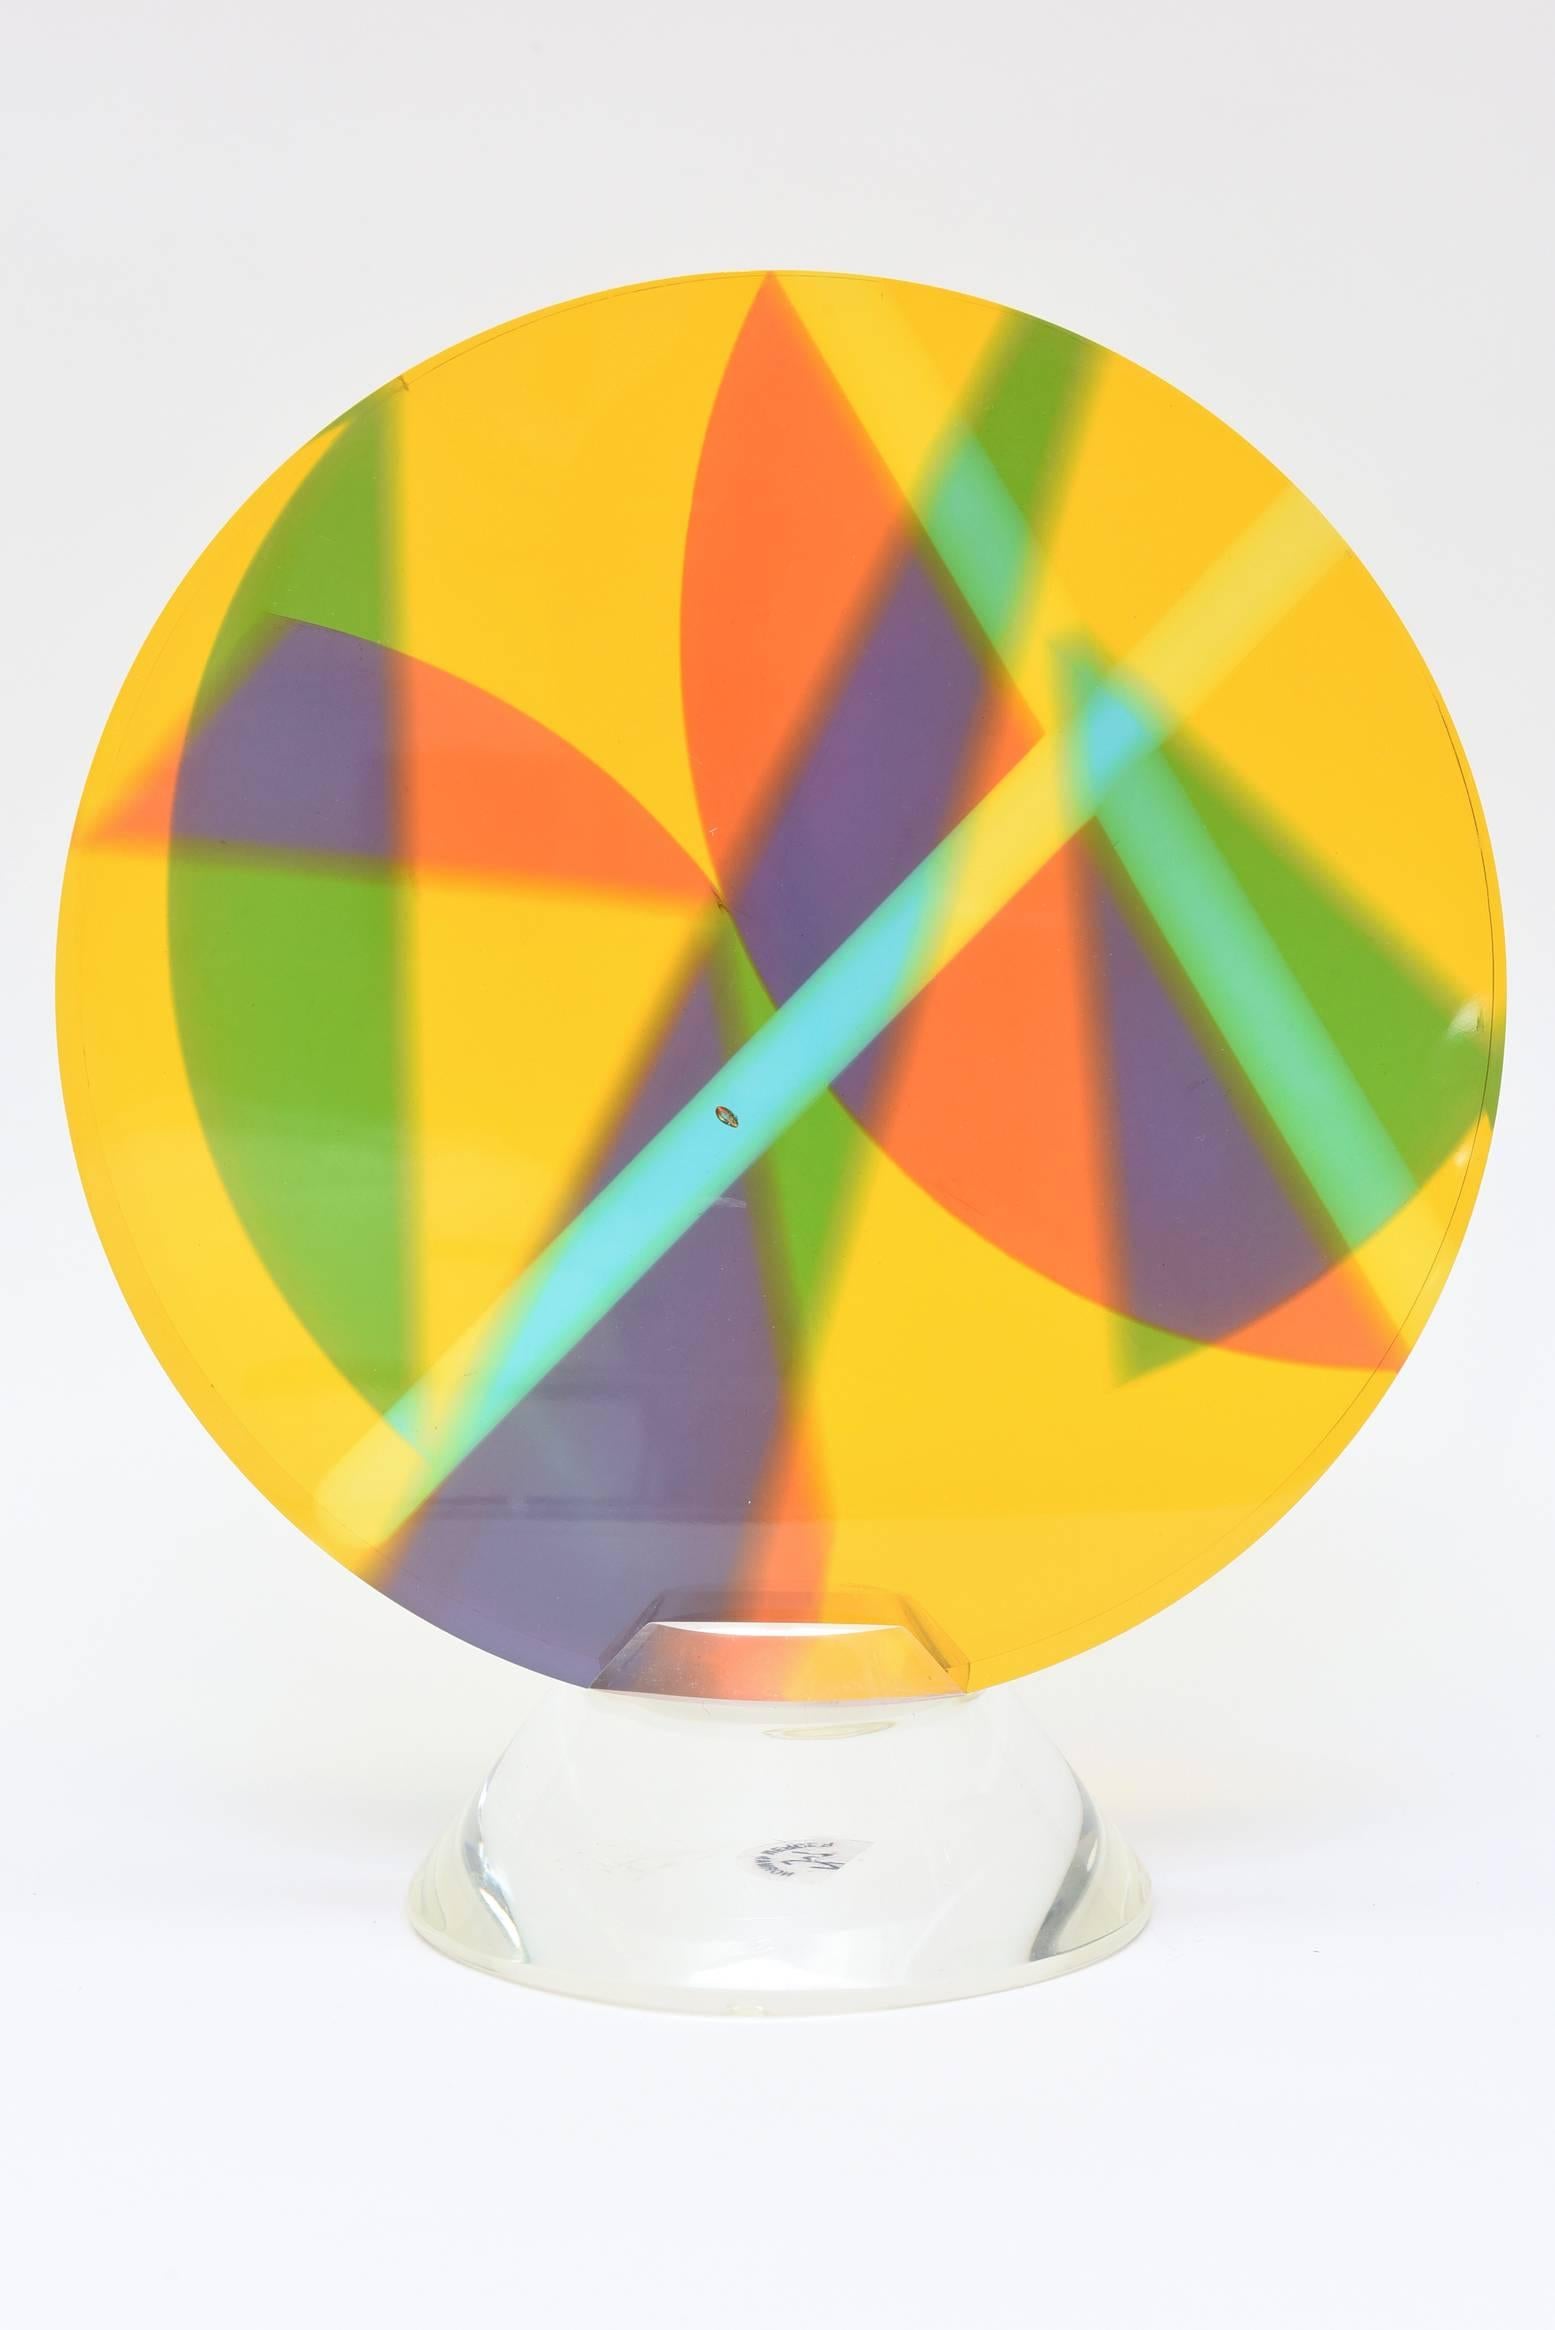 This is a fantastic Norman Mercer Lucite sculpture that almost looks like rays of light are hitting and going off in different directions.
The colors are fantastic and of course they change with the refraction and reflection of the play of light.